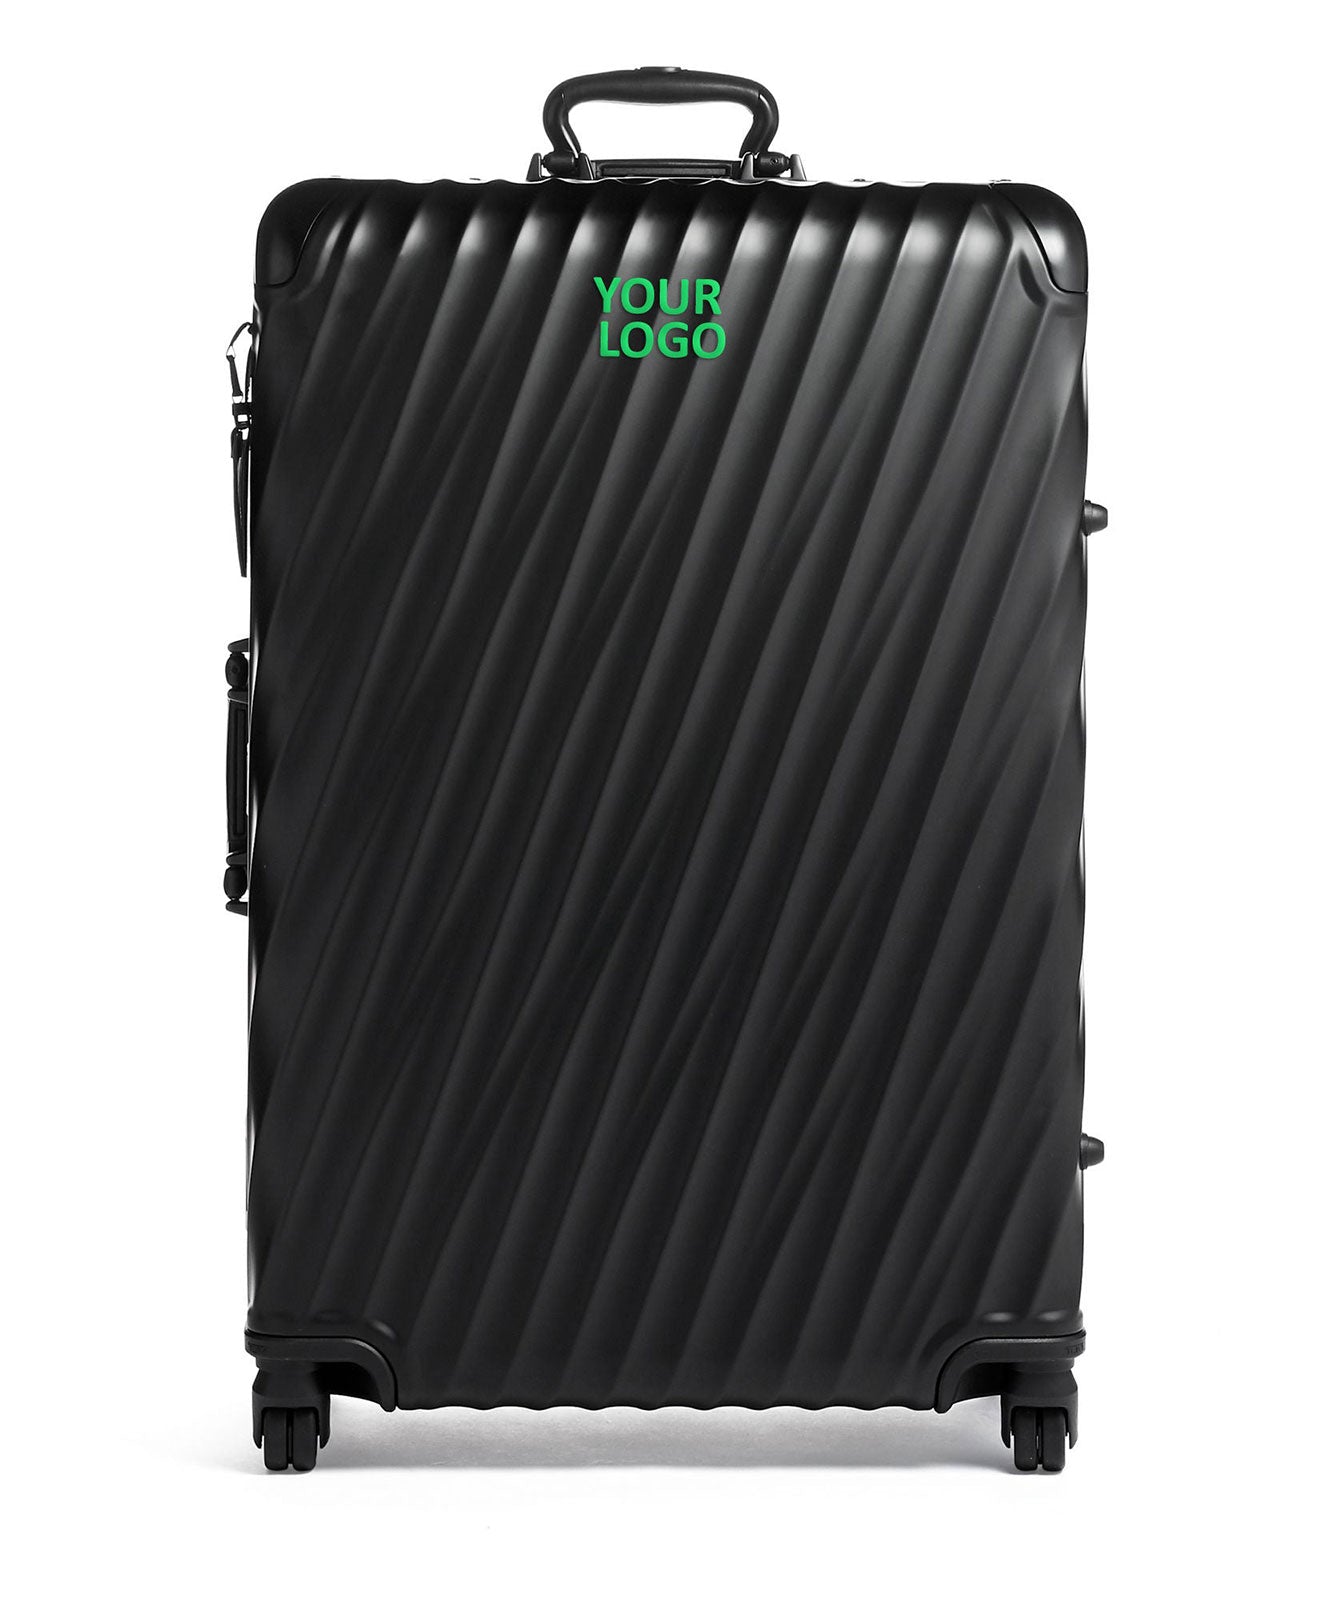 Tumi Extended Trip Packing Case Black 36869MD2